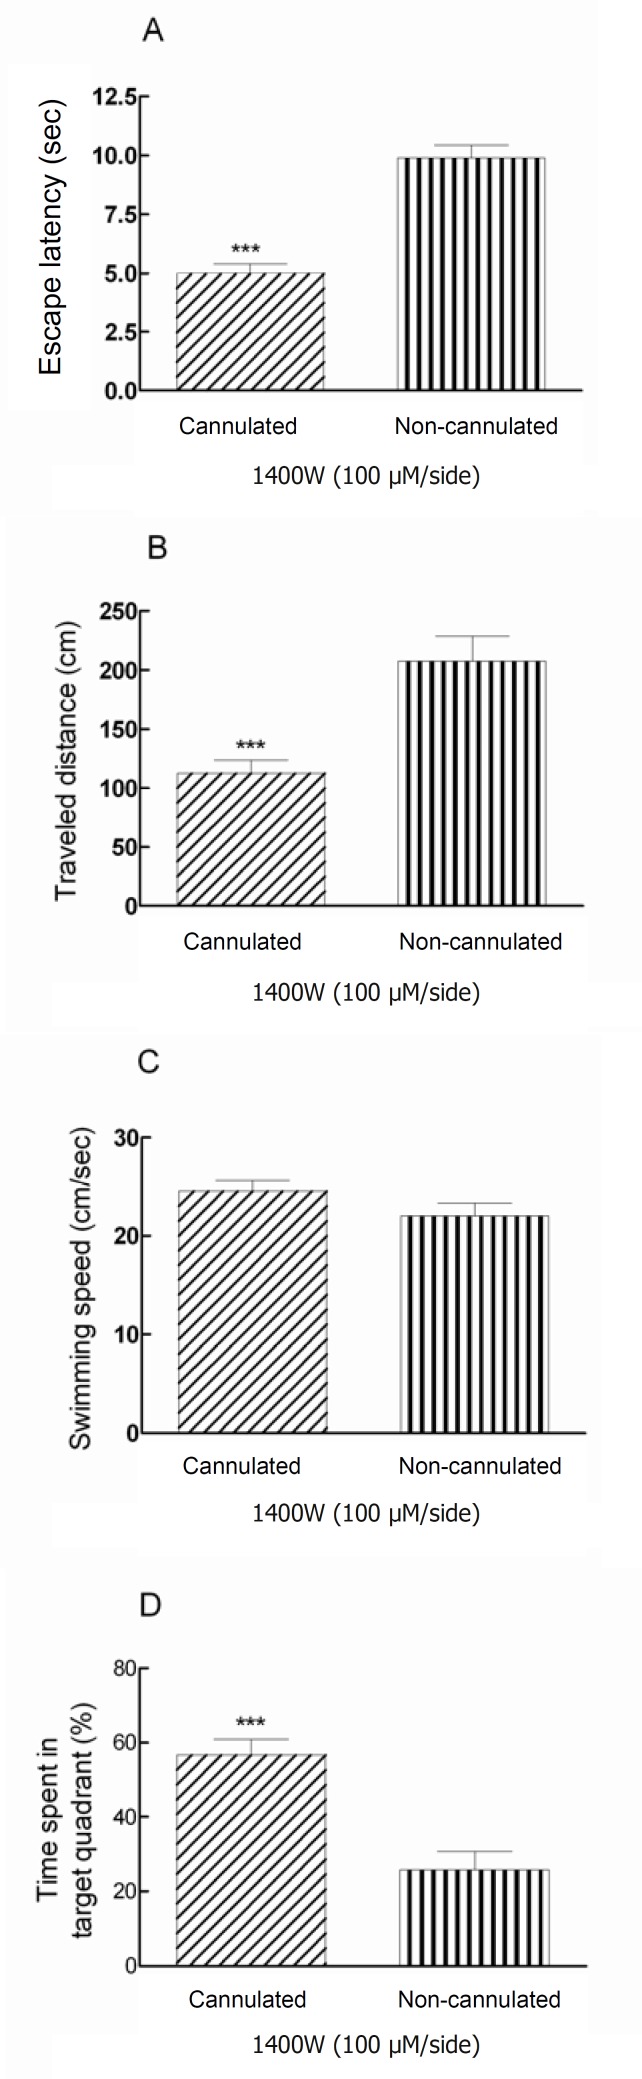 Post-training bilateral intra-hippocampal infusions of 1400W (100 μM/side) decreased the escape latency and traveled distance significantly (*** P < 0.001) in cannulated animals comparing to non-cannulated (anesthetized) group (Figures 2A and 2B). There is a significant difference (*** P < 0.001) between cannulated and non-cannulated rats in time spent in target quadrant (Figure 2D).